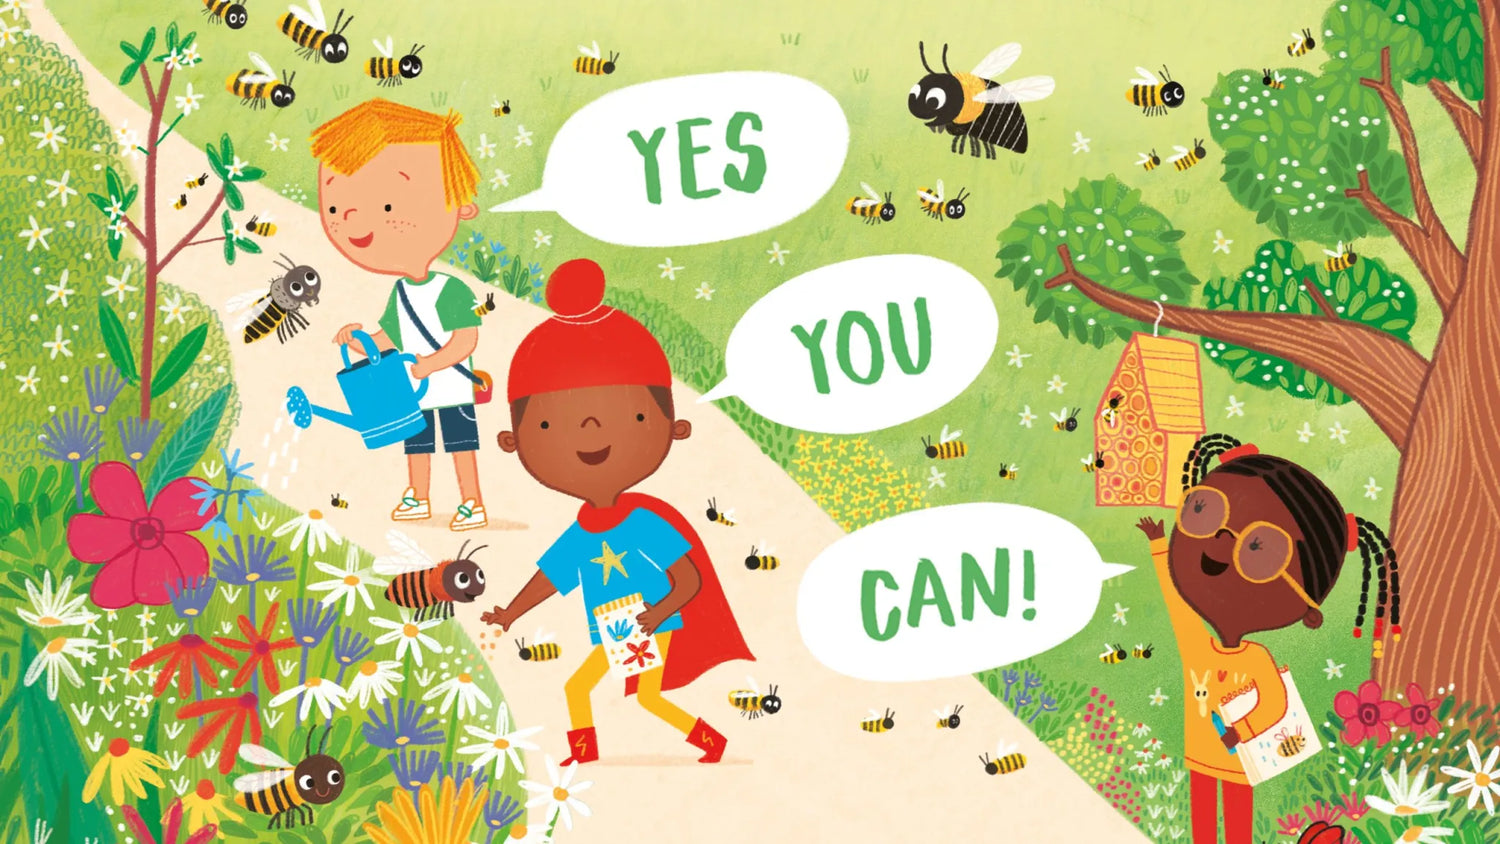 Can kids really help the bees and other pollinators?